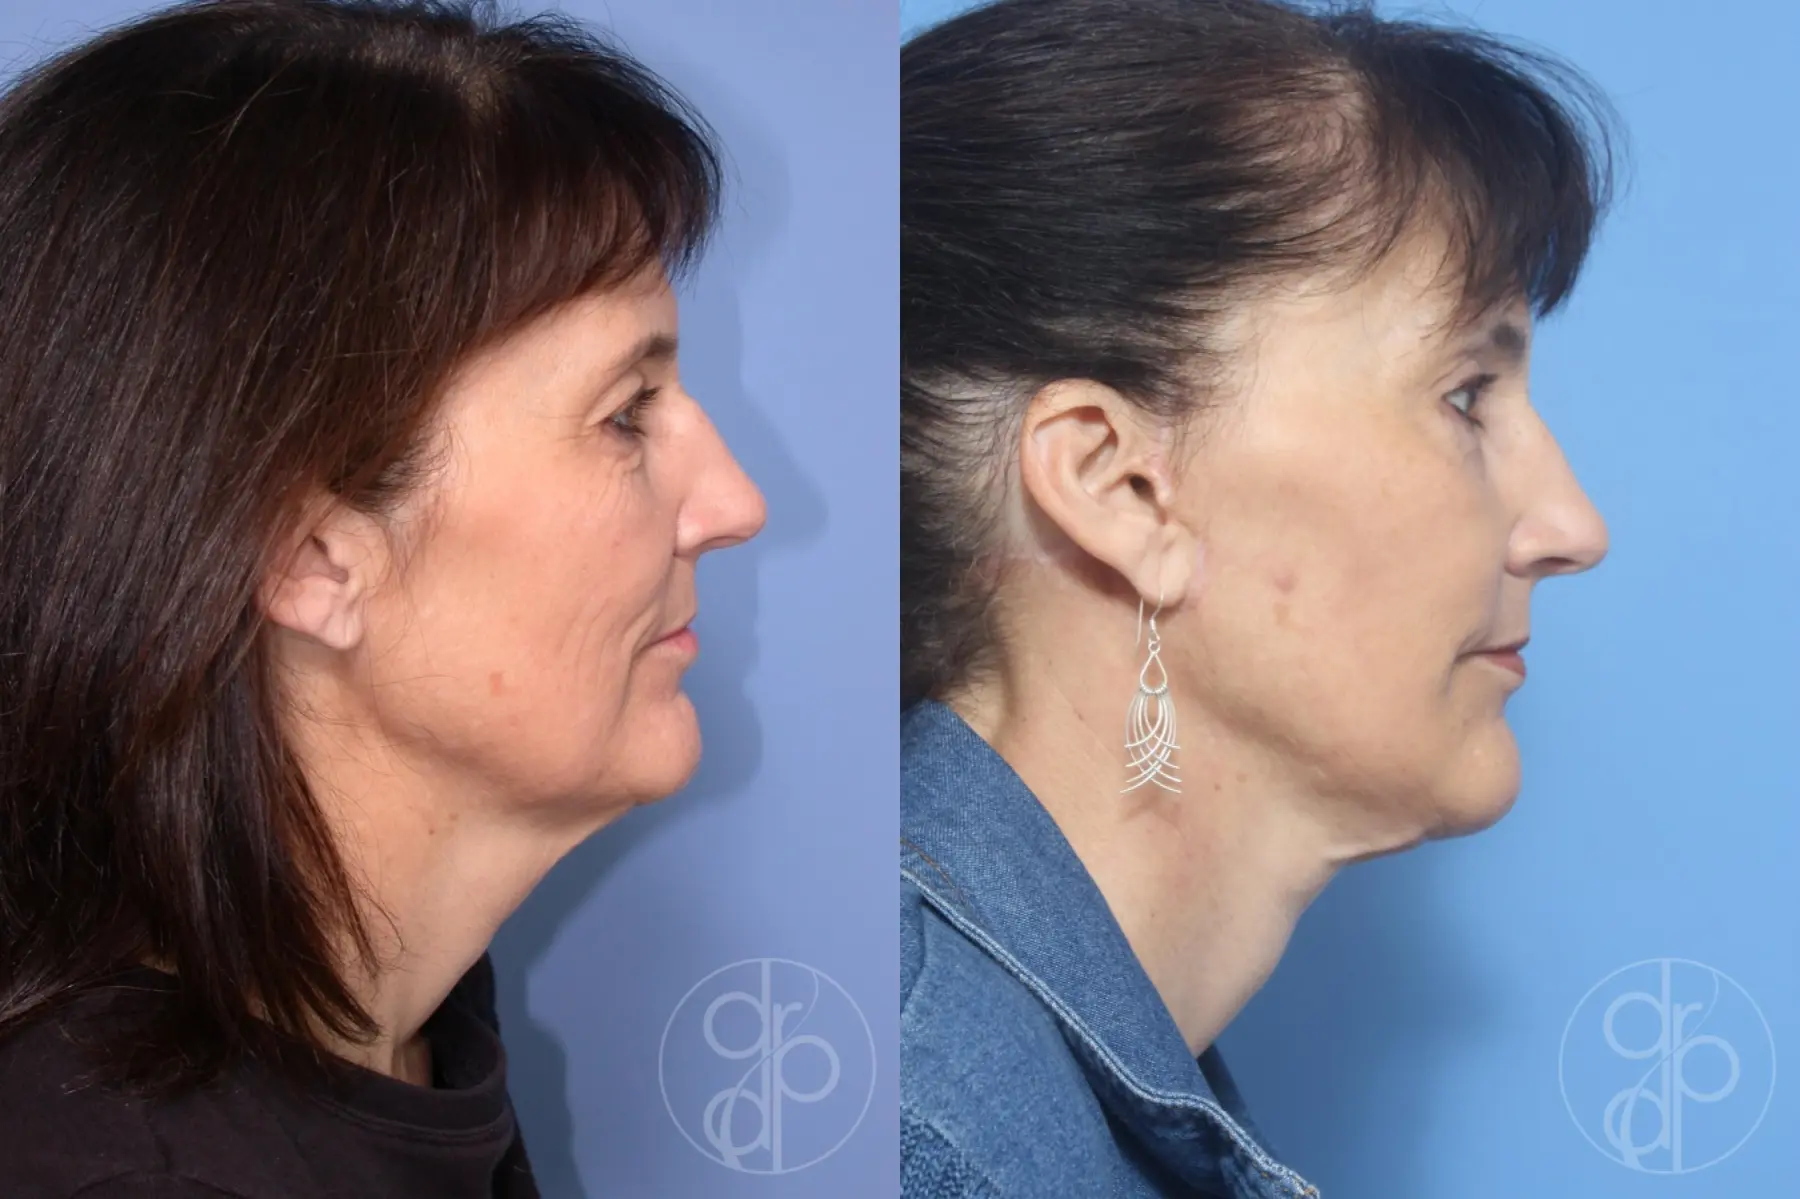 patient 12915 facelift before and after result - Before and After 2